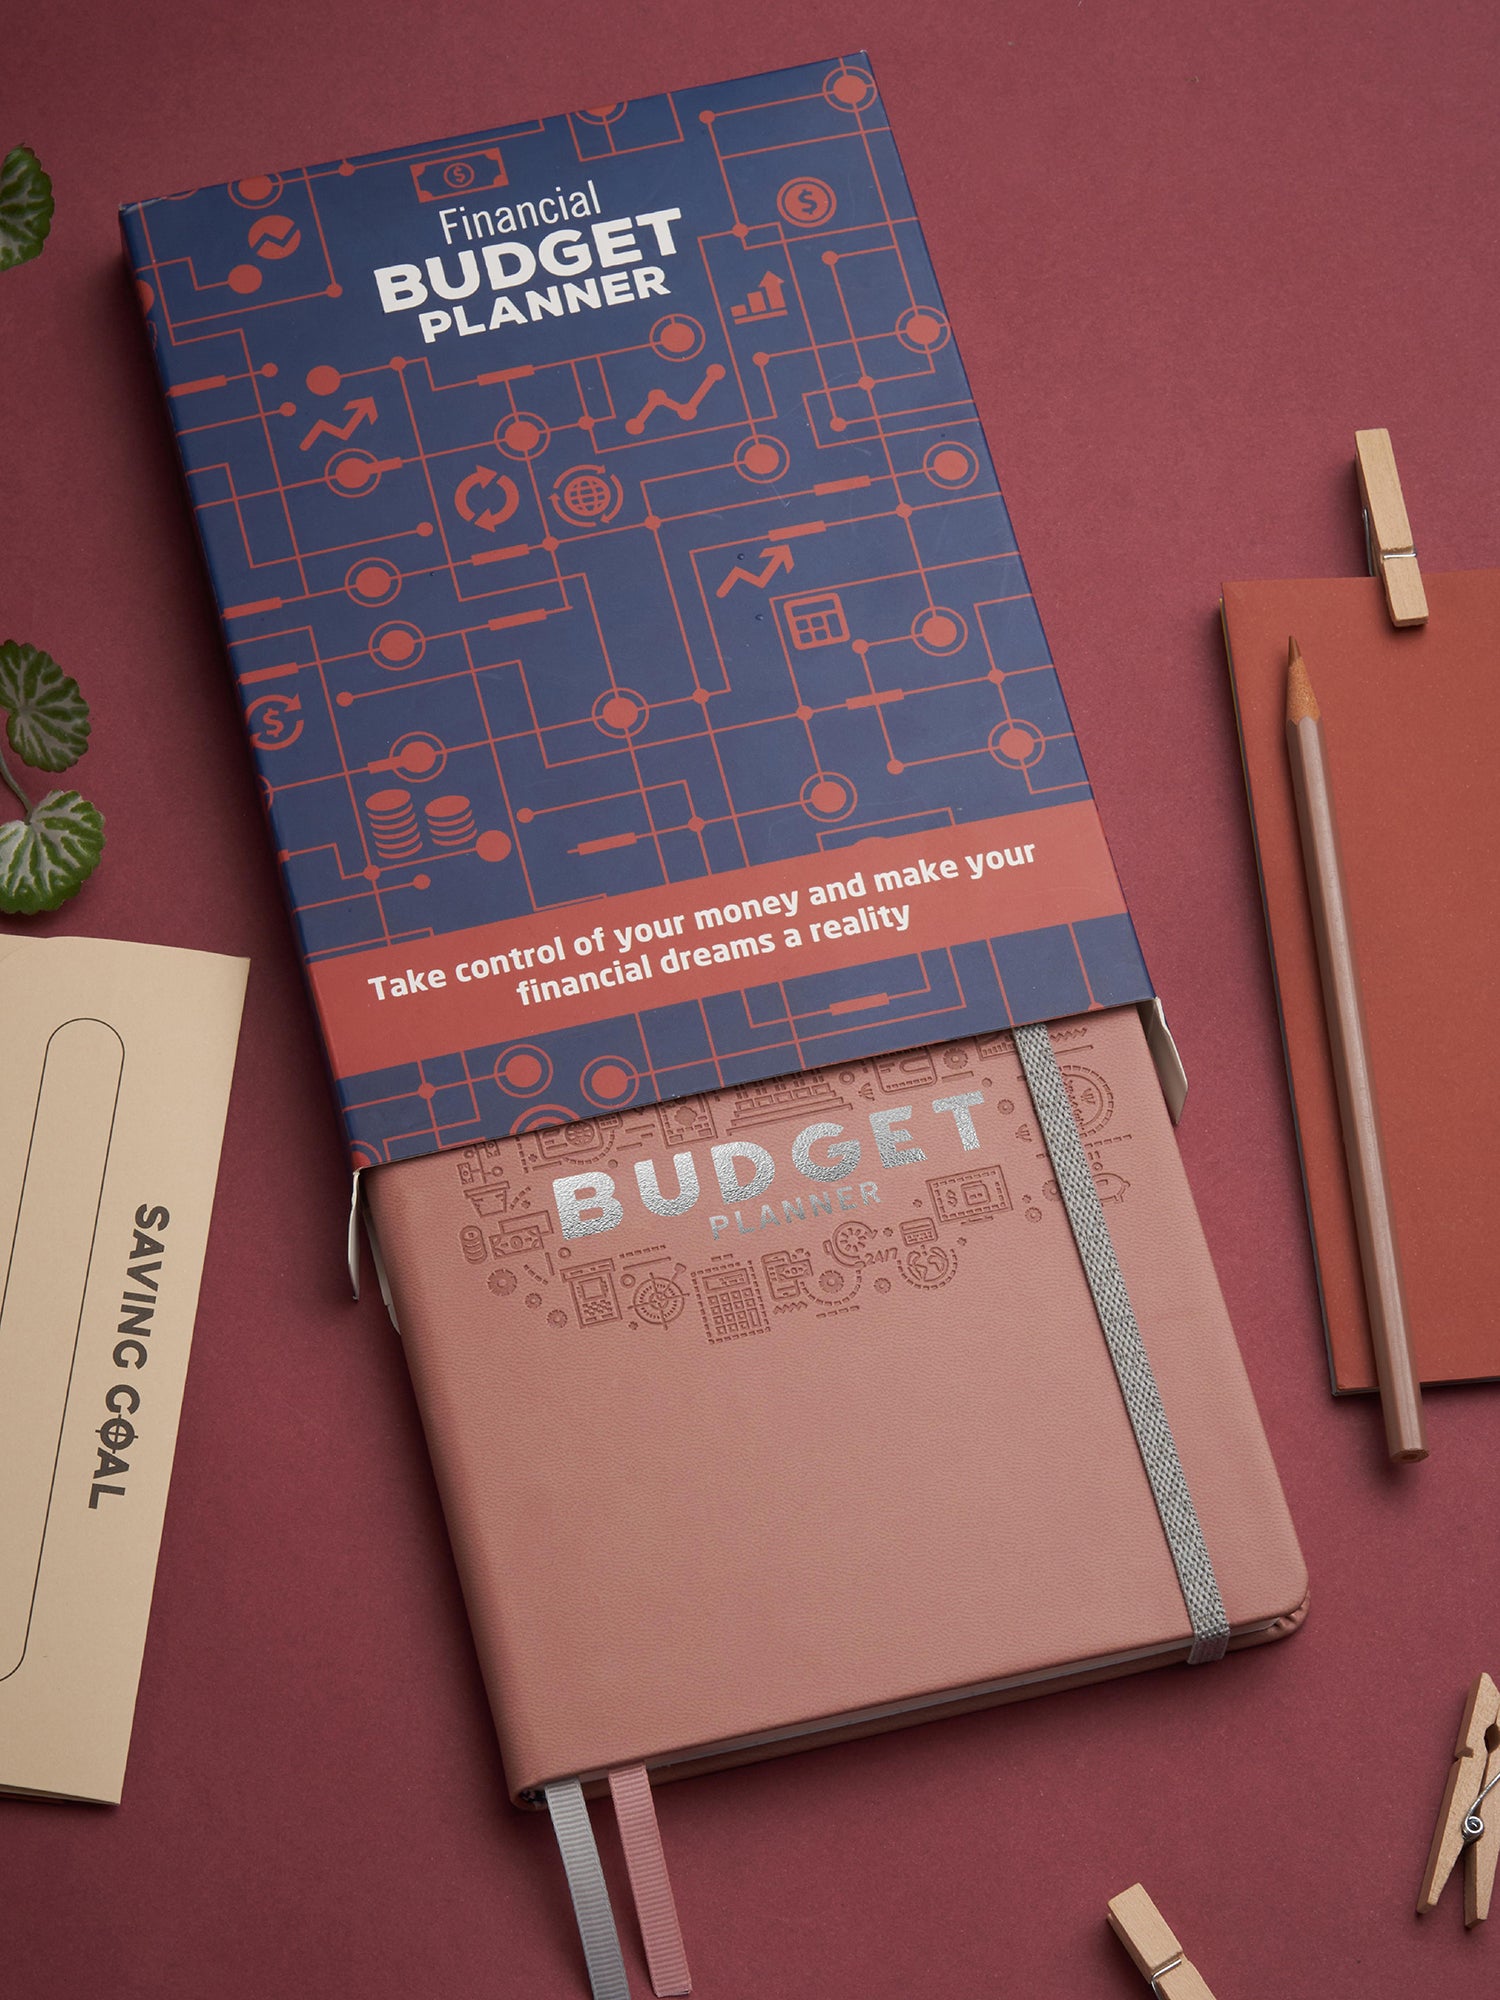 Personalized A5 2024 Undated Hardbound Financial Budget Planner (Budget Boss)